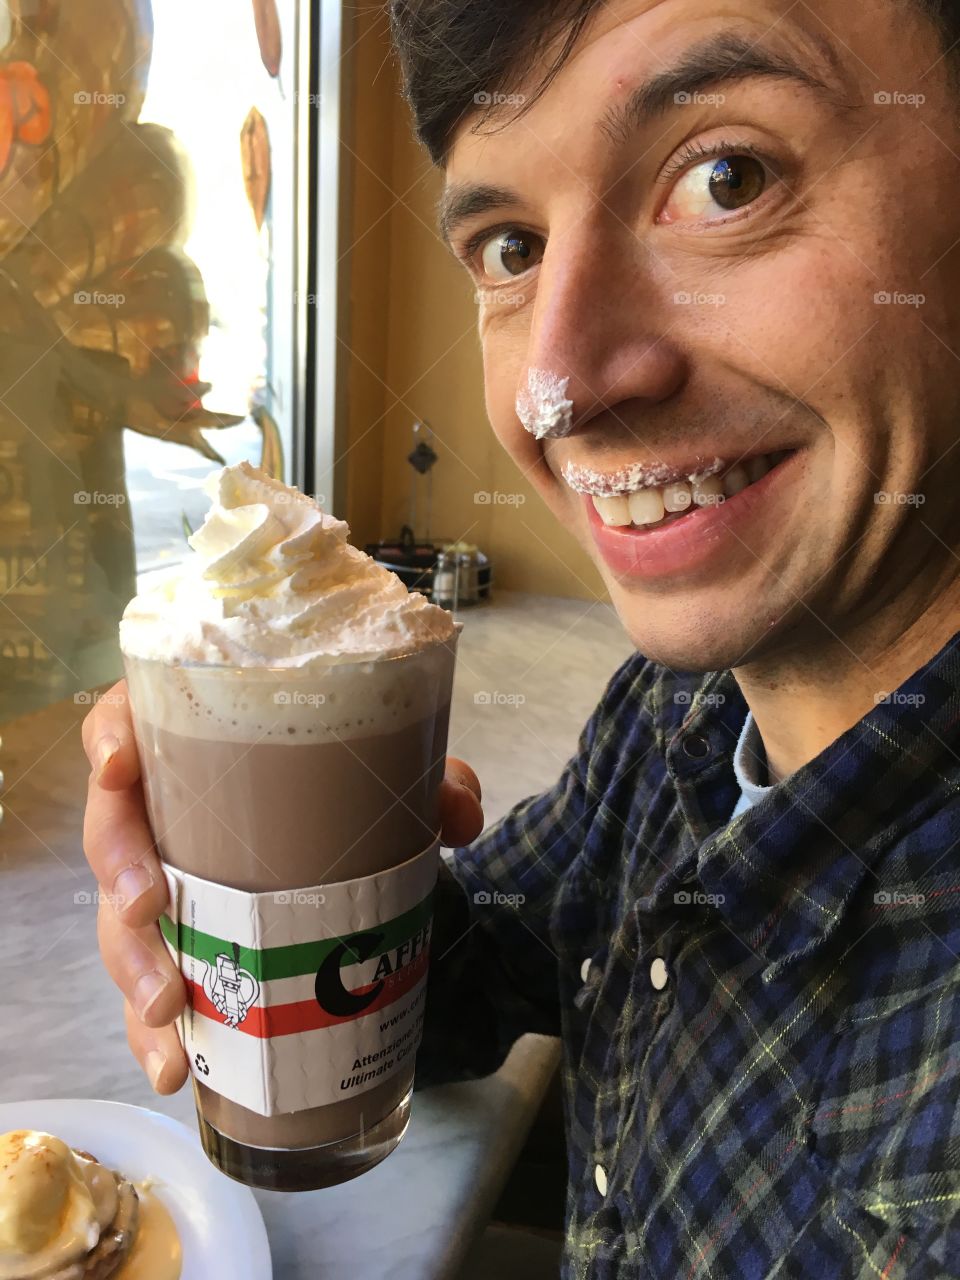 Man holding a whipped cream topped coffee beverage who is smiling with whipped cream on his nose and face